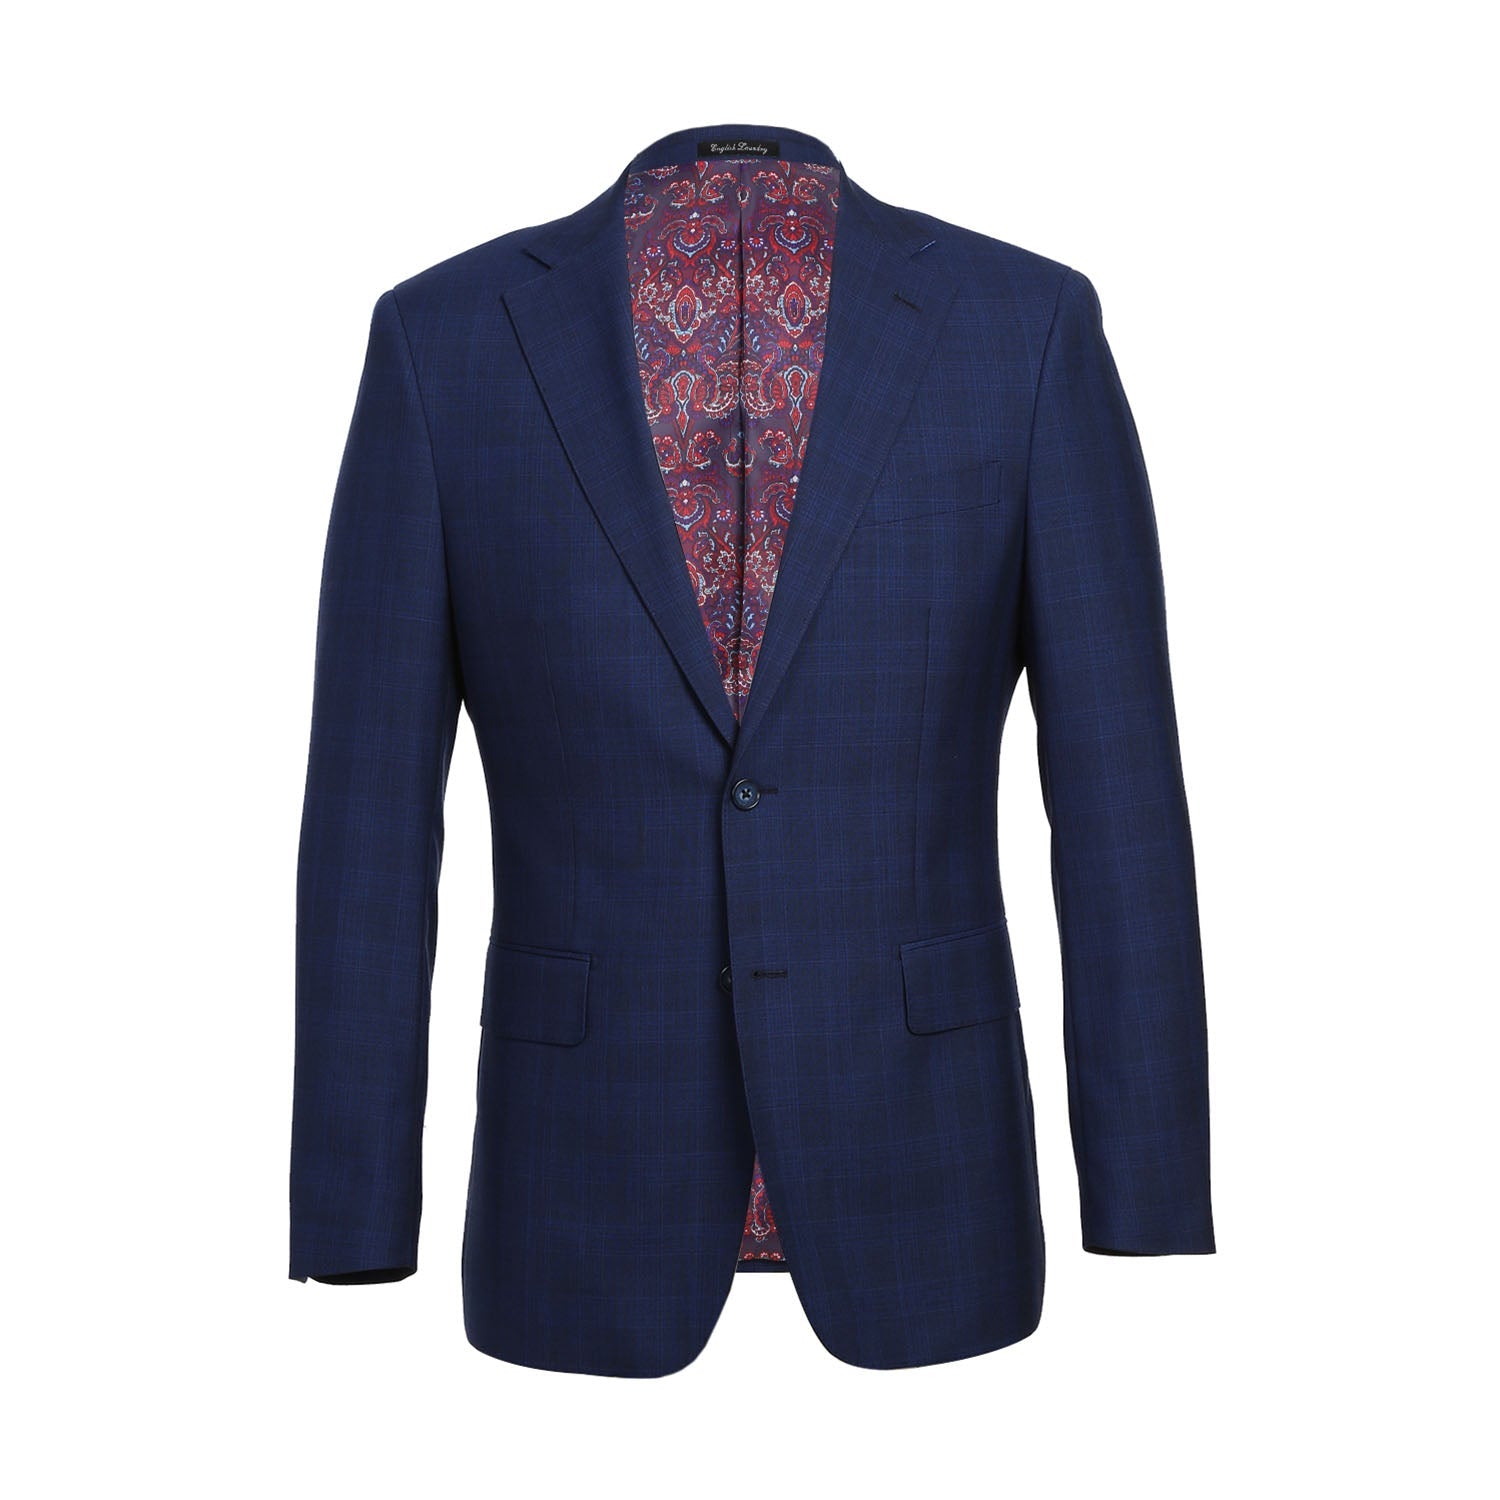 English Laundry Midnight Blue Check Wool Suit 2